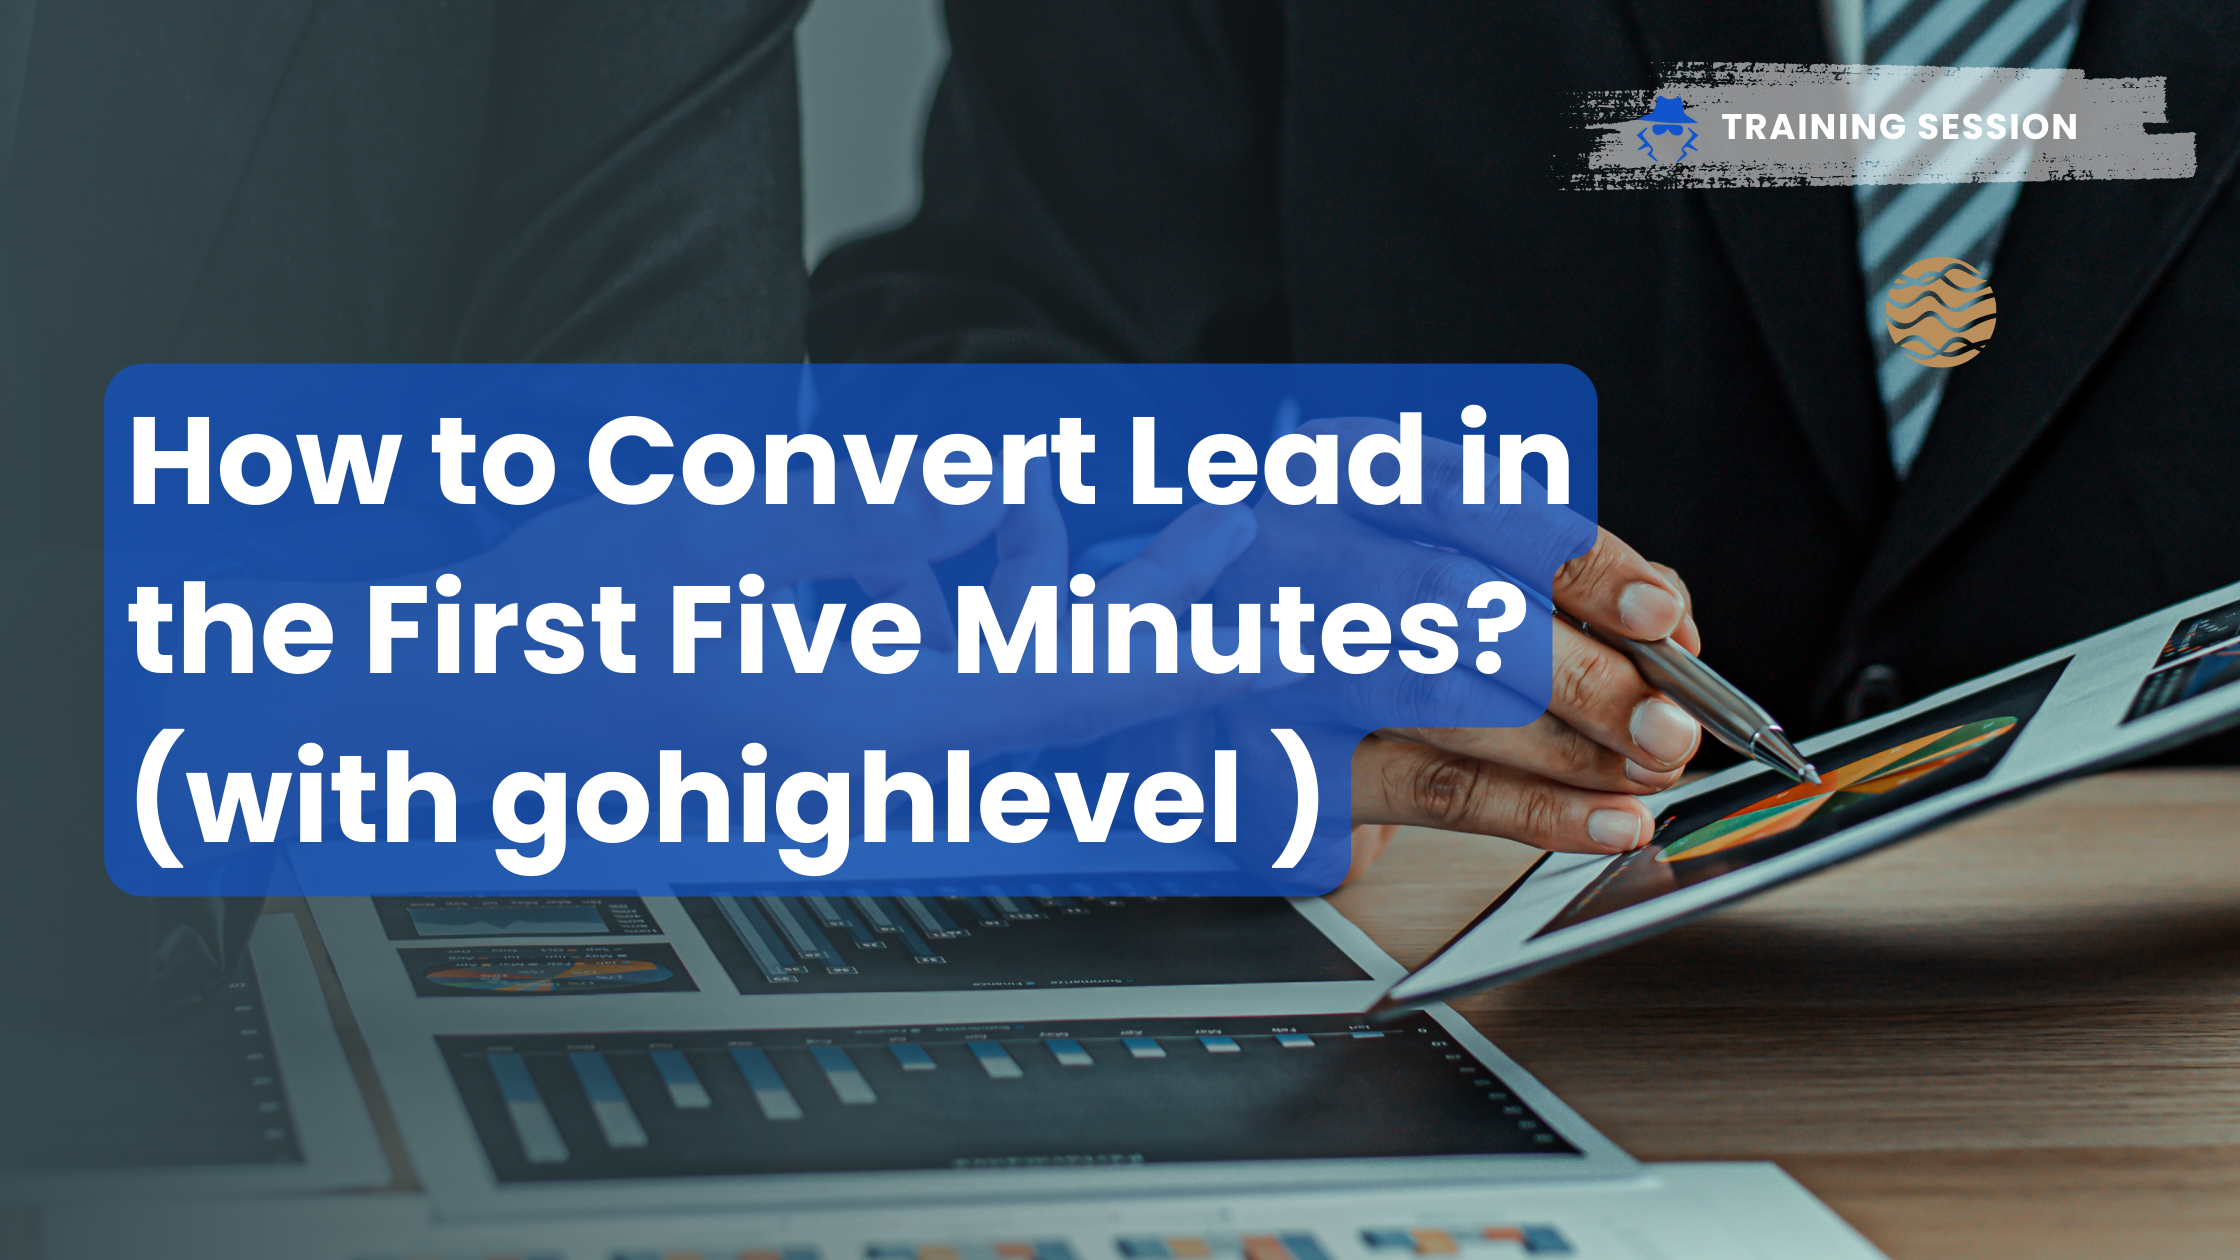 How to Convert Lead in the First Five Minutes? (with gohighlevel)